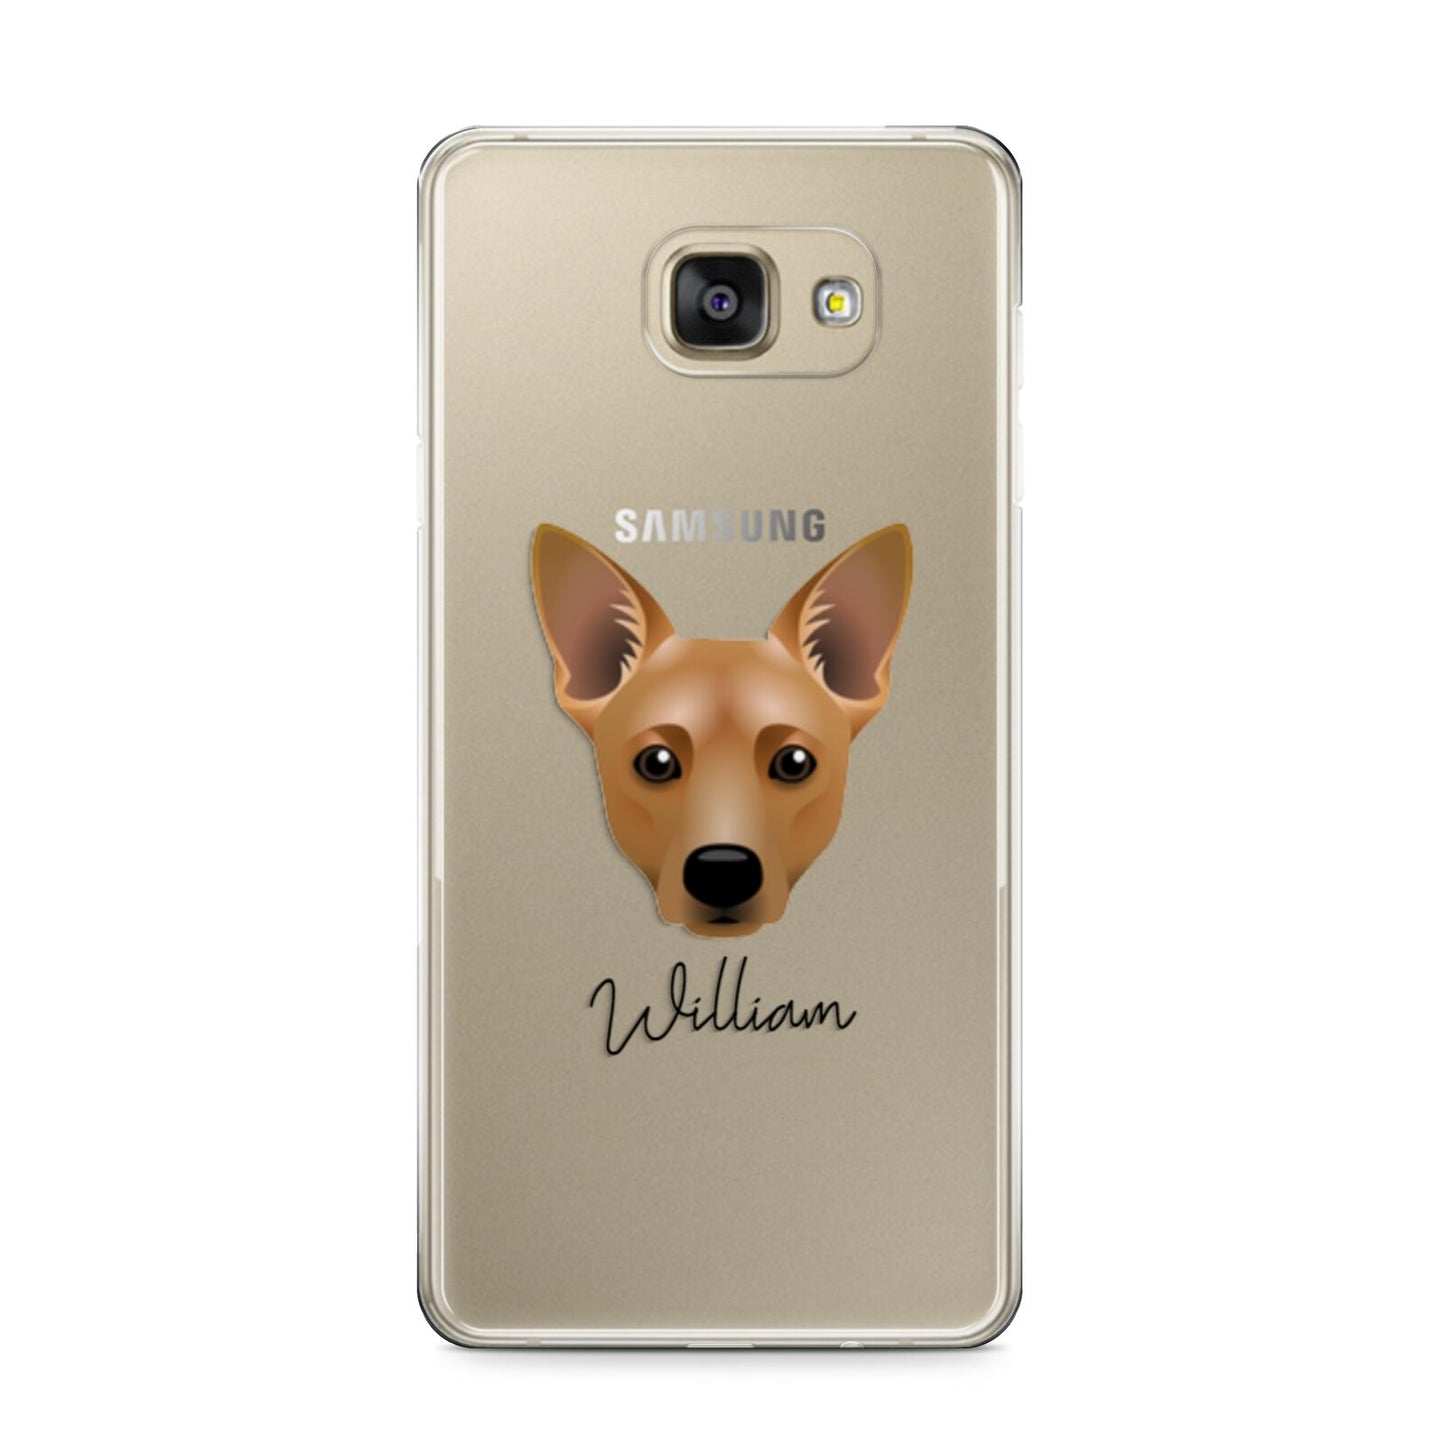 Cojack Personalised Samsung Galaxy A9 2016 Case on gold phone